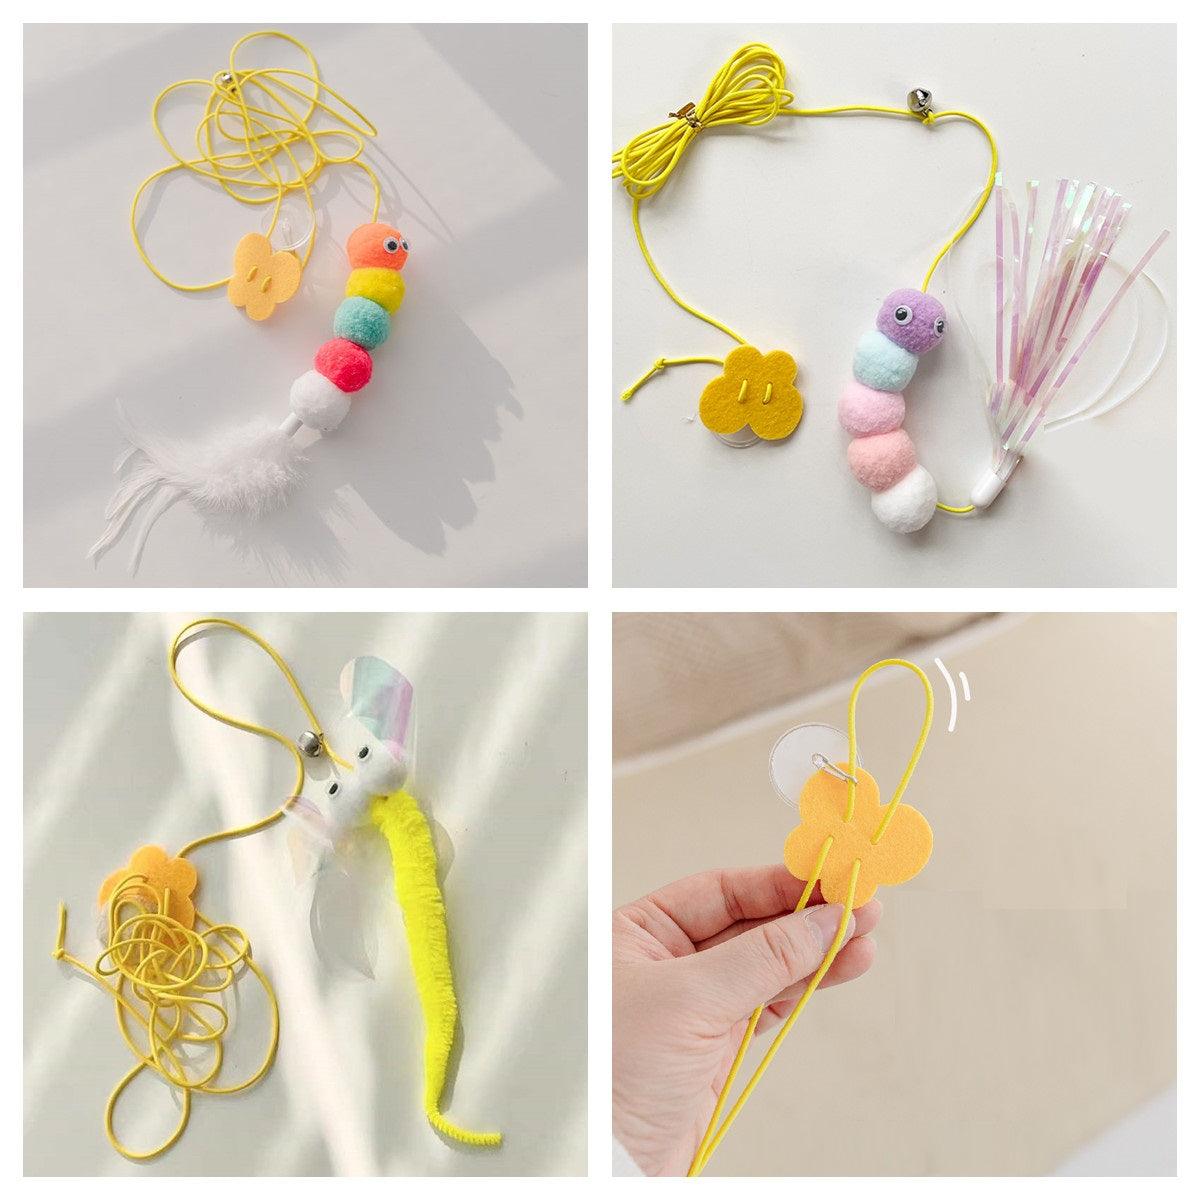 Cat Toys Simulated Caterpillar Cute Toys Funny Self-Hey Interactive Toy Rope Grabbing Mouse Telescopic Hanging Cat Pet Supplies - Dog Hugs Cat